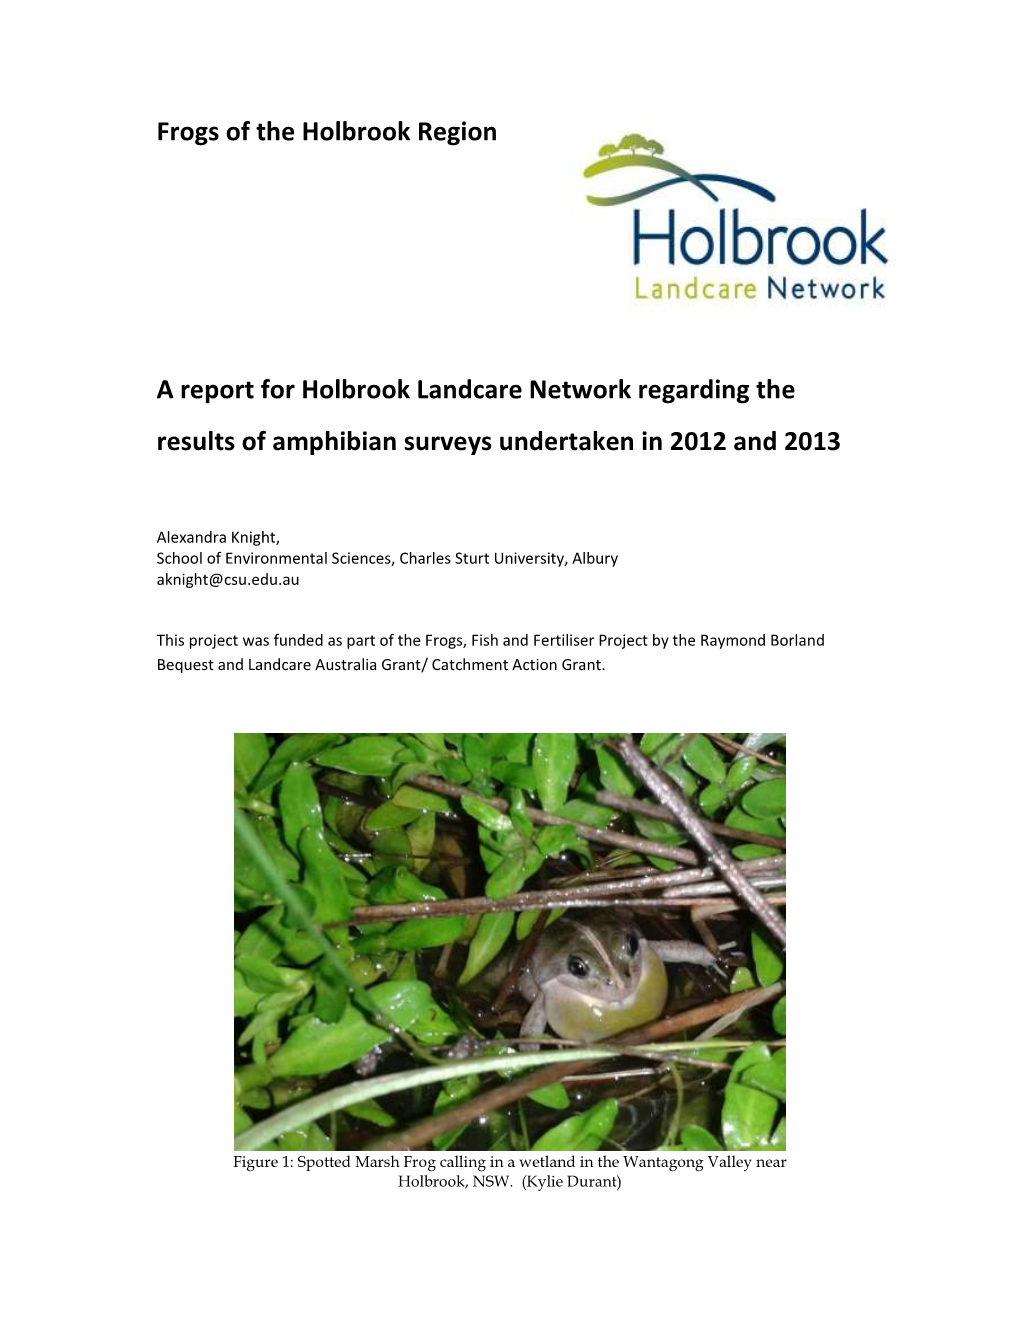 Frog Project Report 2012/13